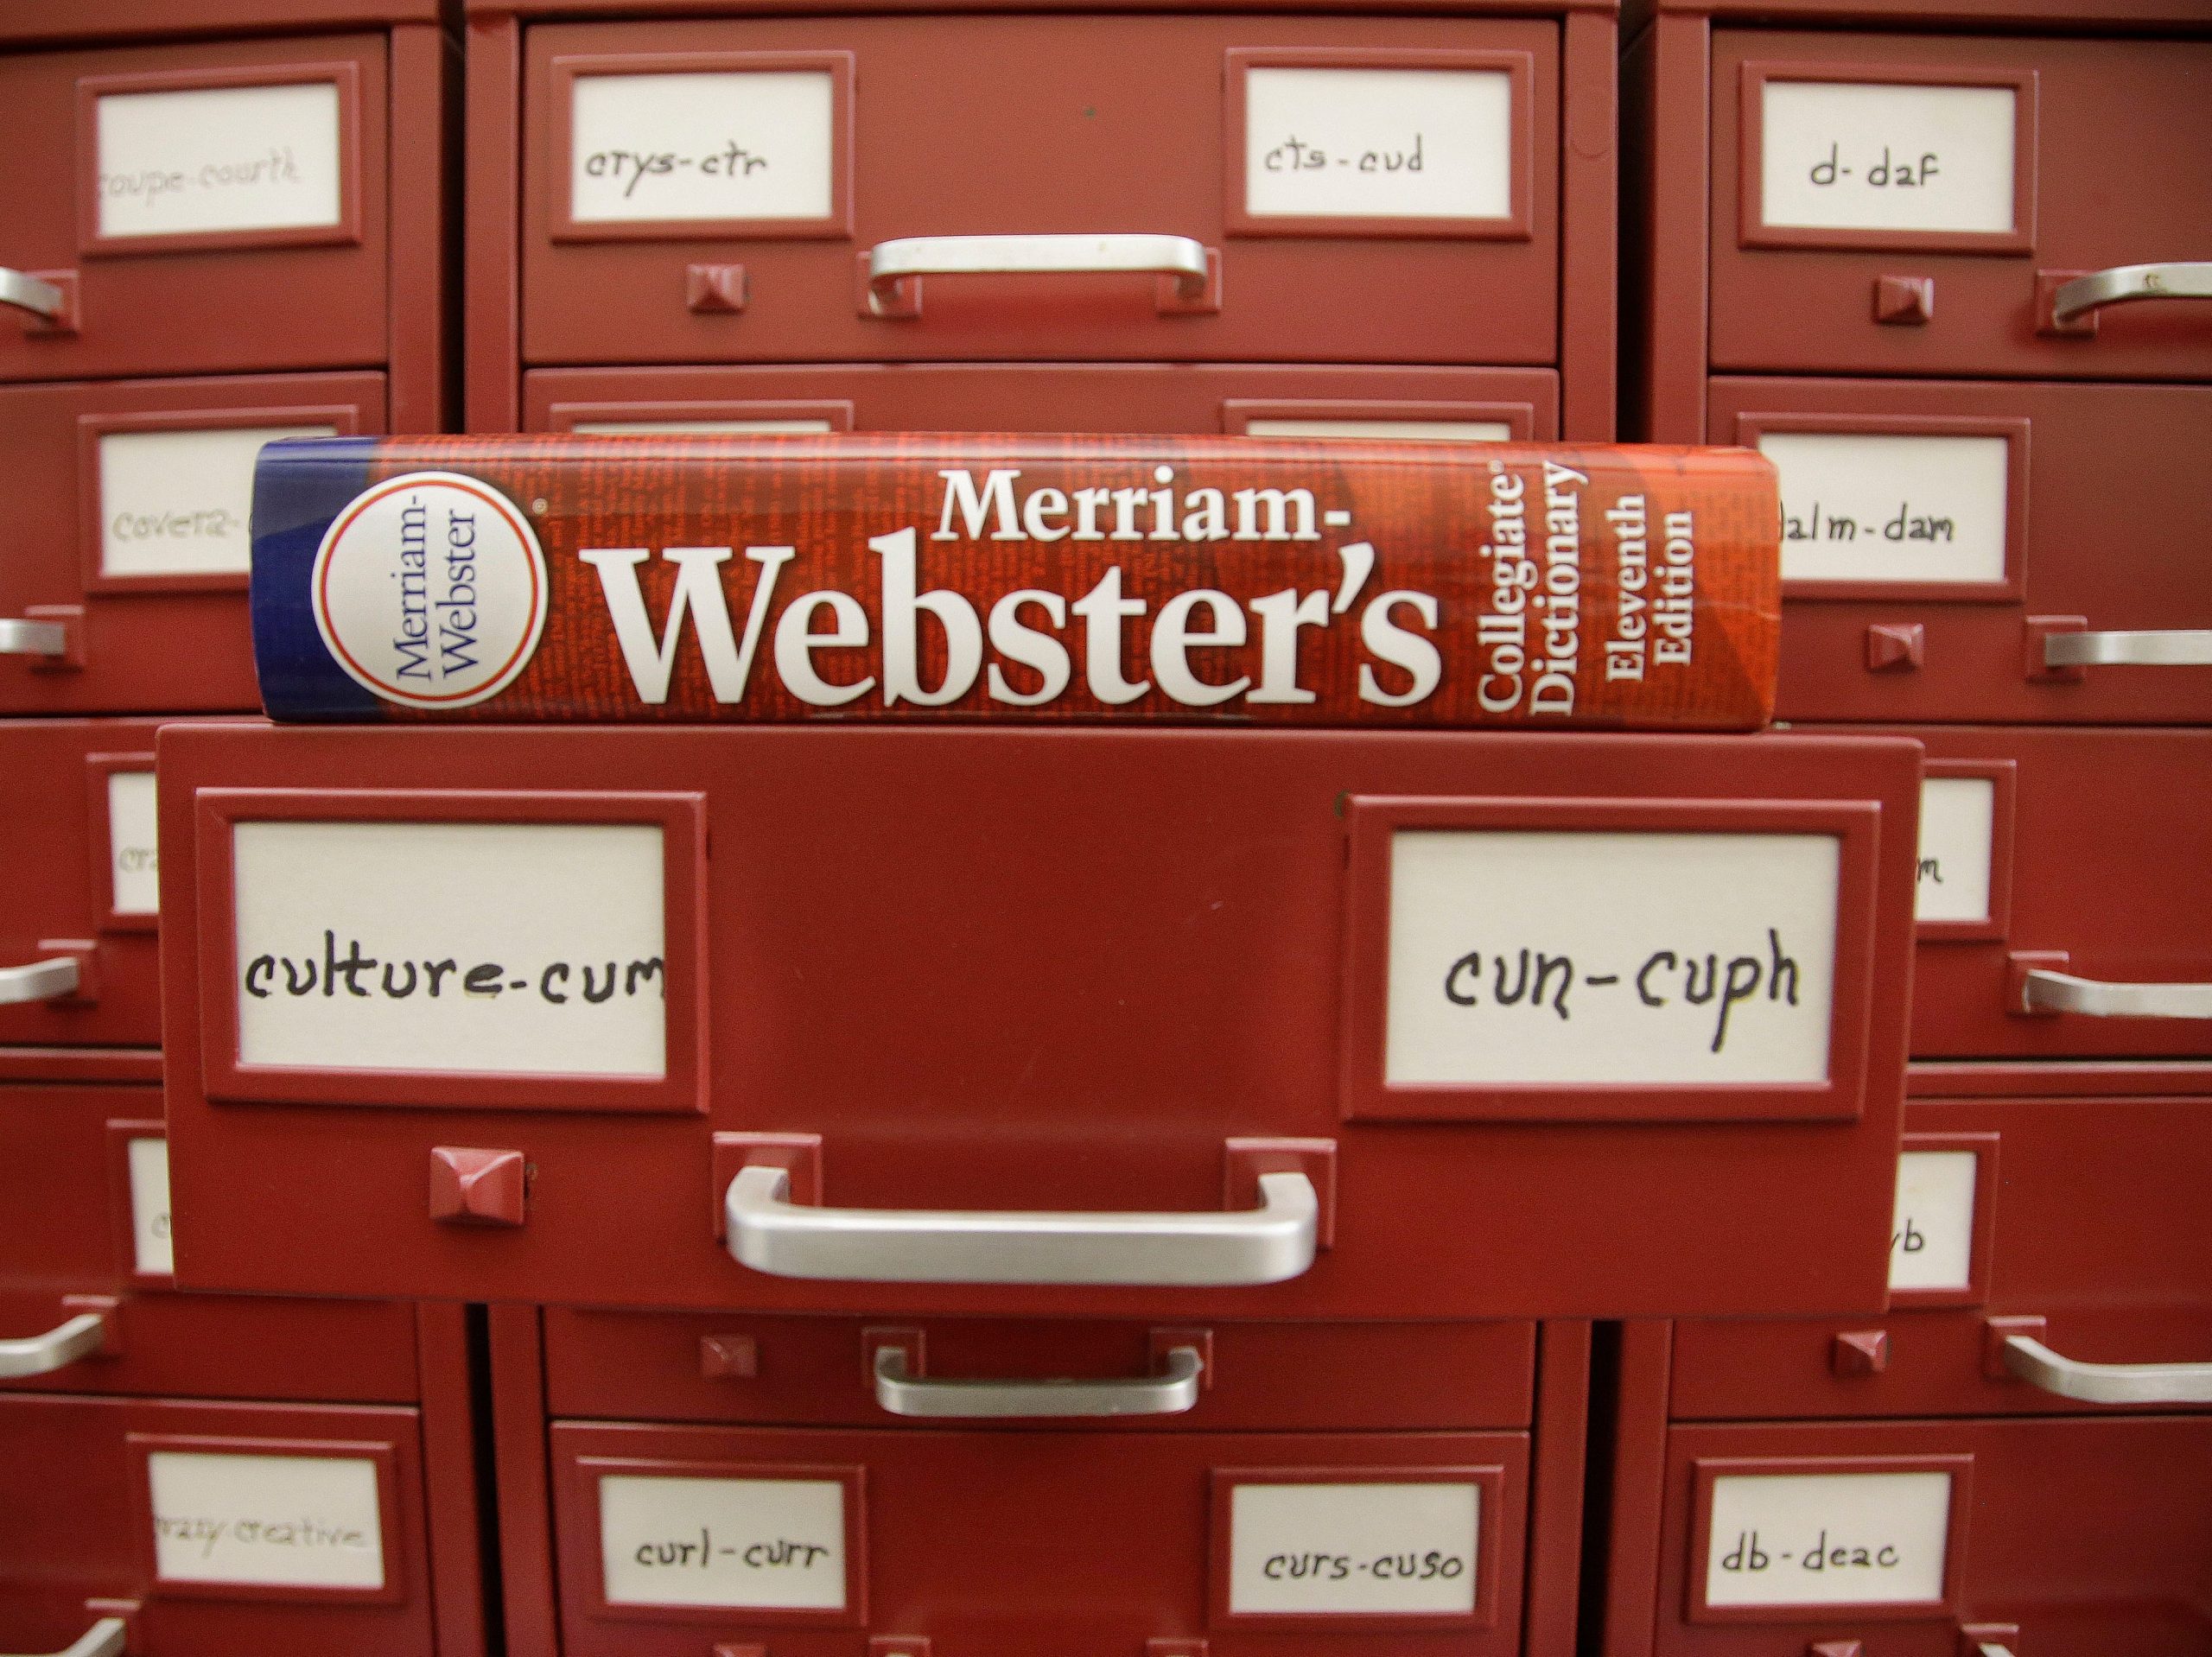 A Merriam-Webster dictionary sits atop their citation files.